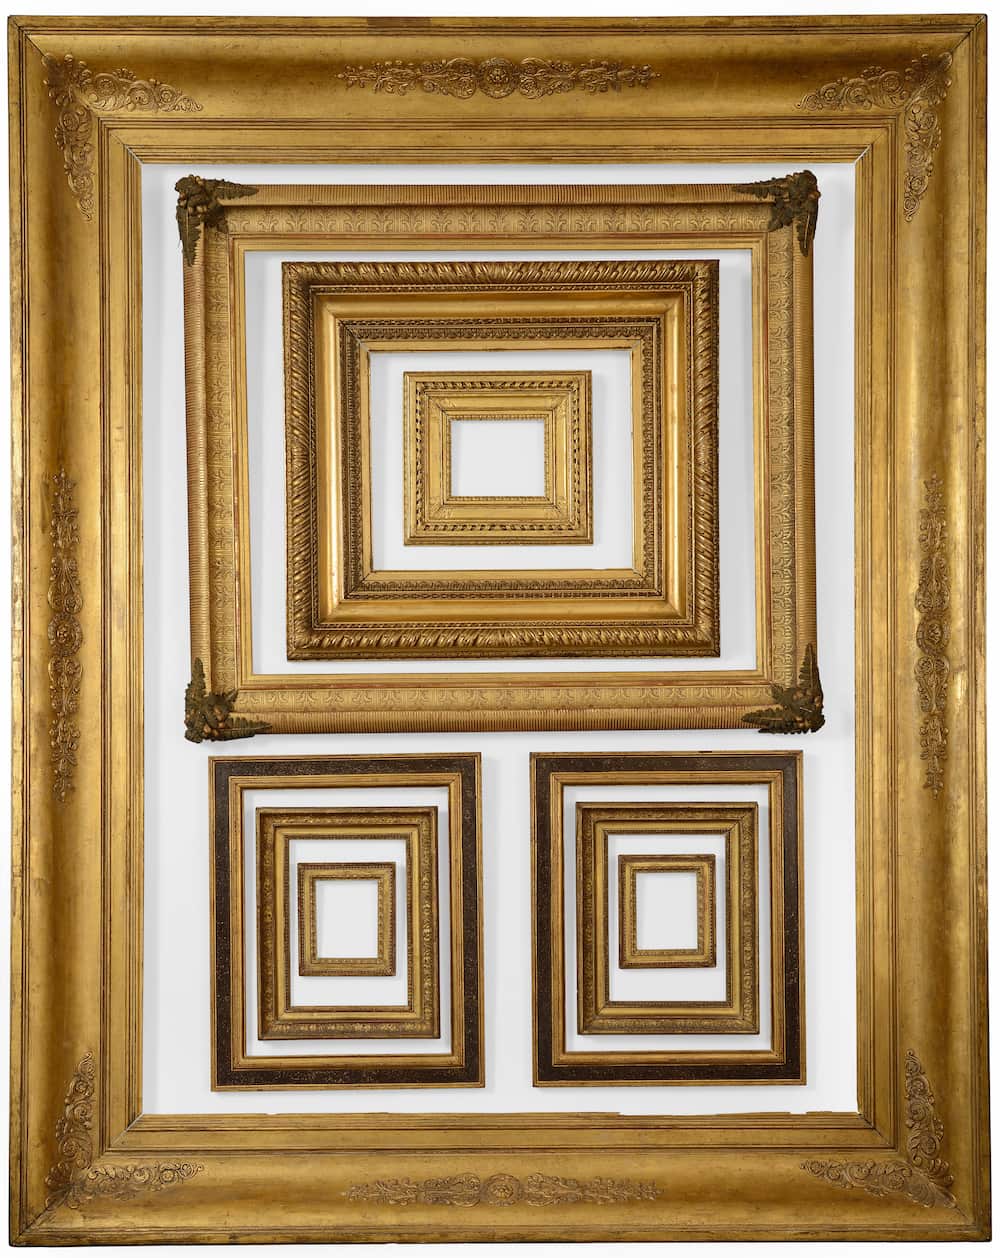 European frames hanging, Late 18th/early 19th century.